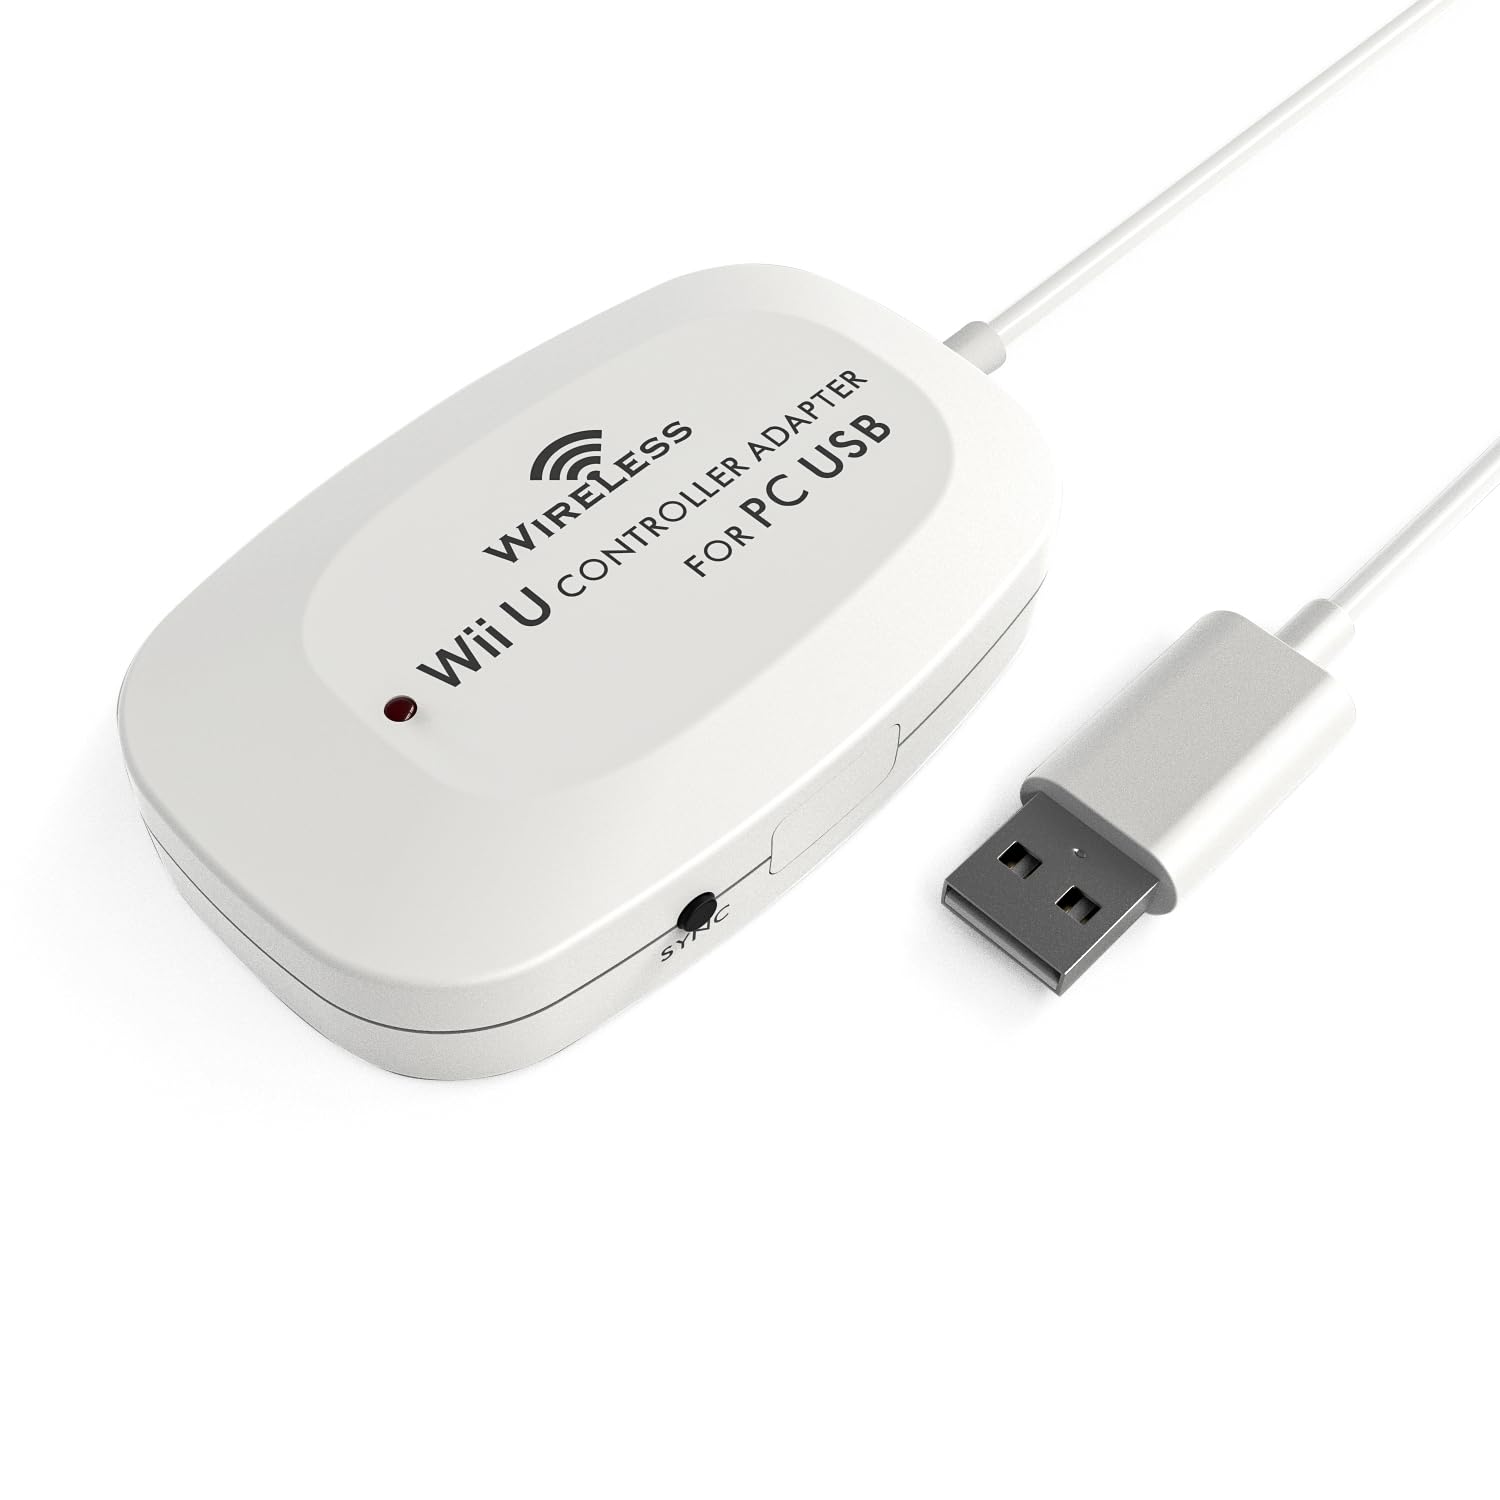 May Flash Wireless Wii U Pro Controller Adapter for PC USB